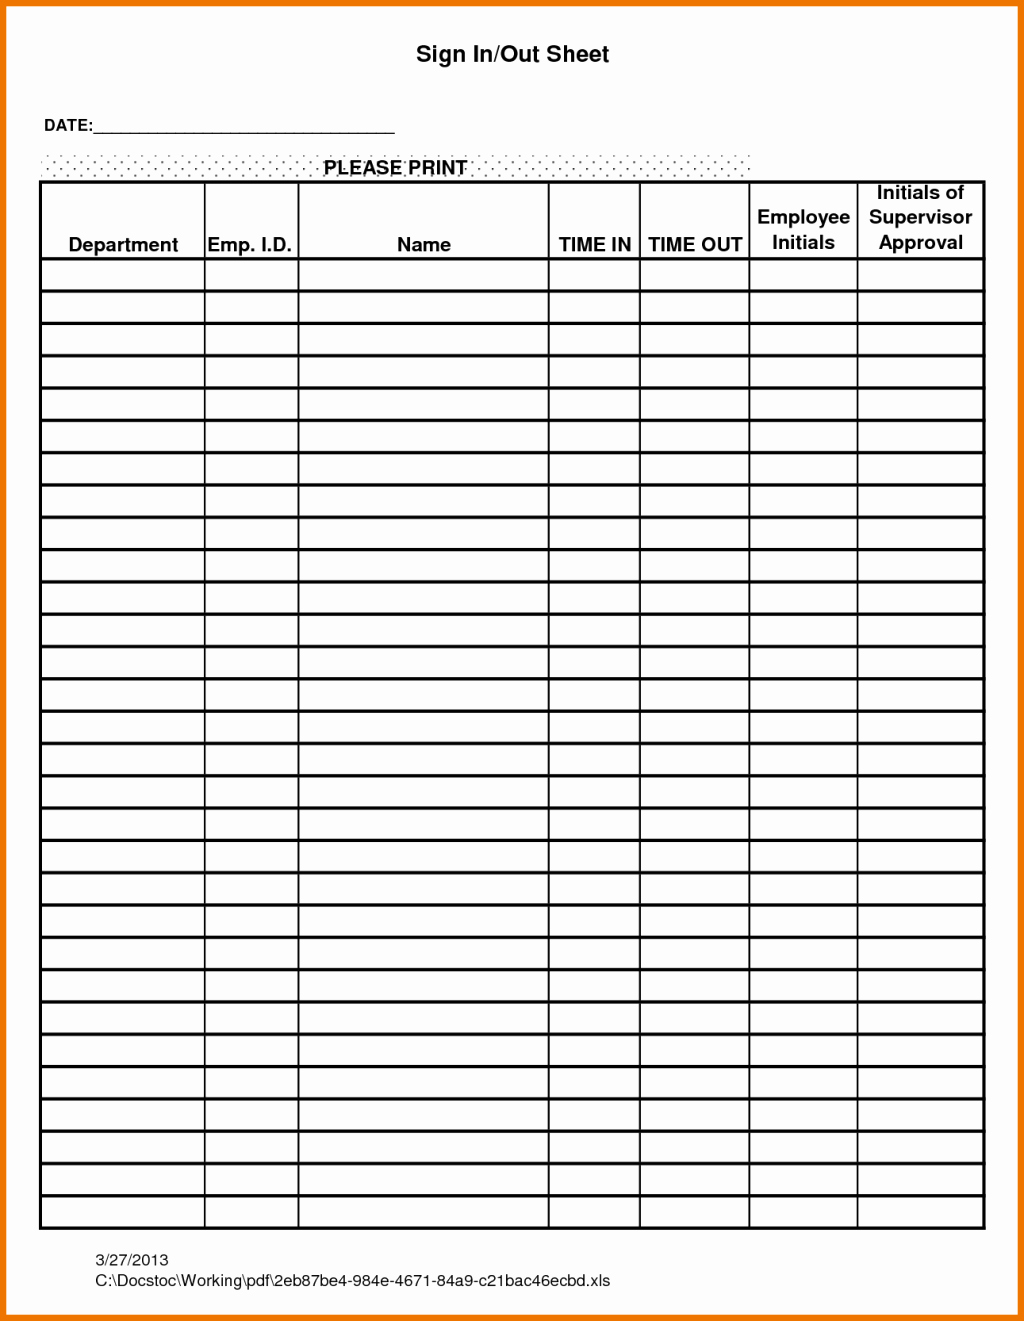 Employee Sign In Sheets Luxury Interesting Employee attendance Sign In Sheet with